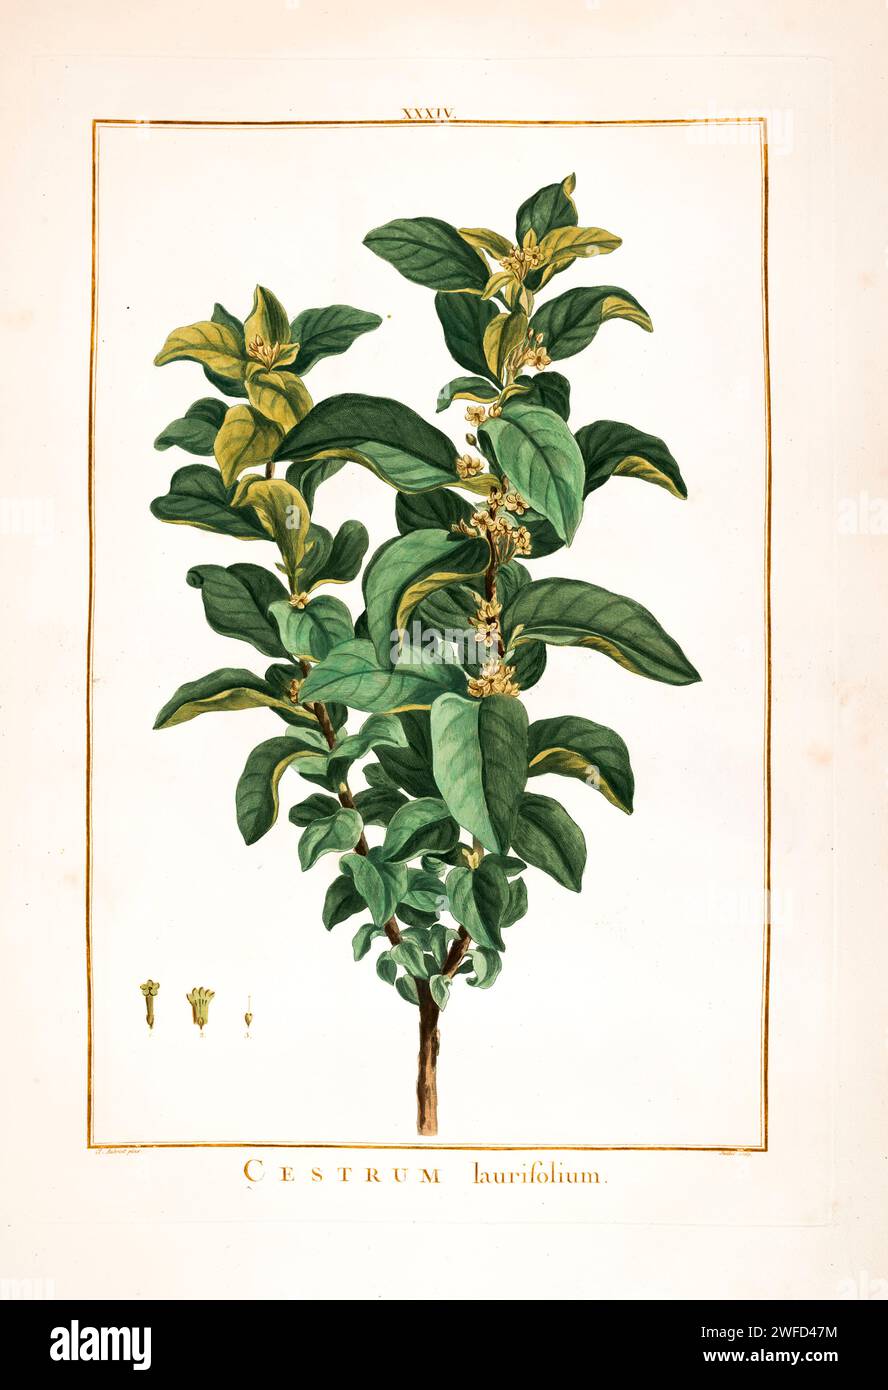 Cestrum laurifolium syn Cestrum diurnum Hand Painted by Pierre-Joseph Redouté and published in Stirpes Novae aut Minus Cognitae (1784) by Charles Louis L'Héritier de Brutelle. Cestrum is a genus of 150-250 species of flowering plants in the family Solanaceae. They are native to warm temperate to tropical regions of the Americas, Stock Photo